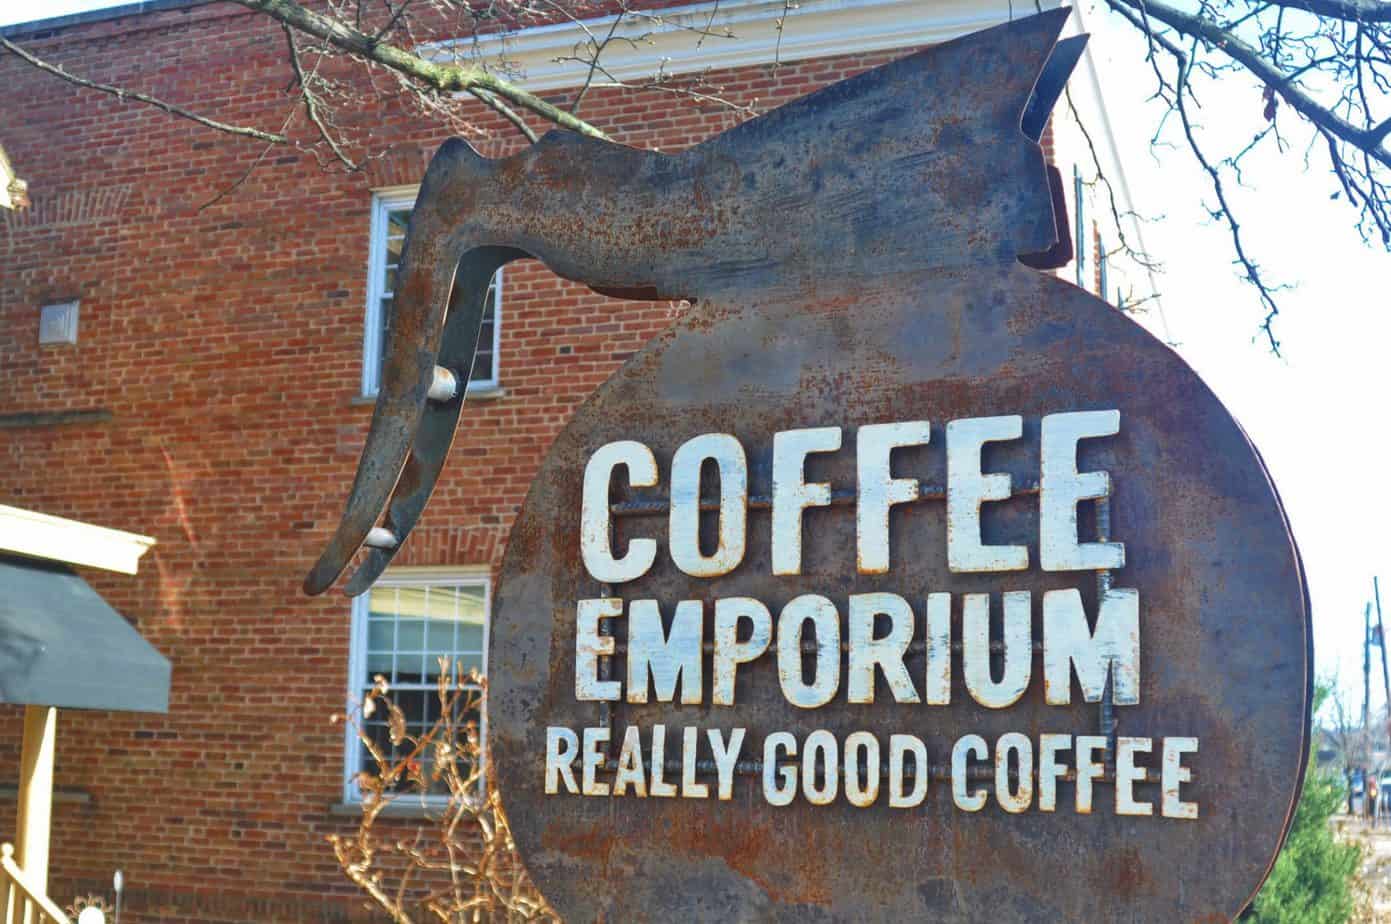 Big sign that says Coffee Emporium Really Good Coffee.